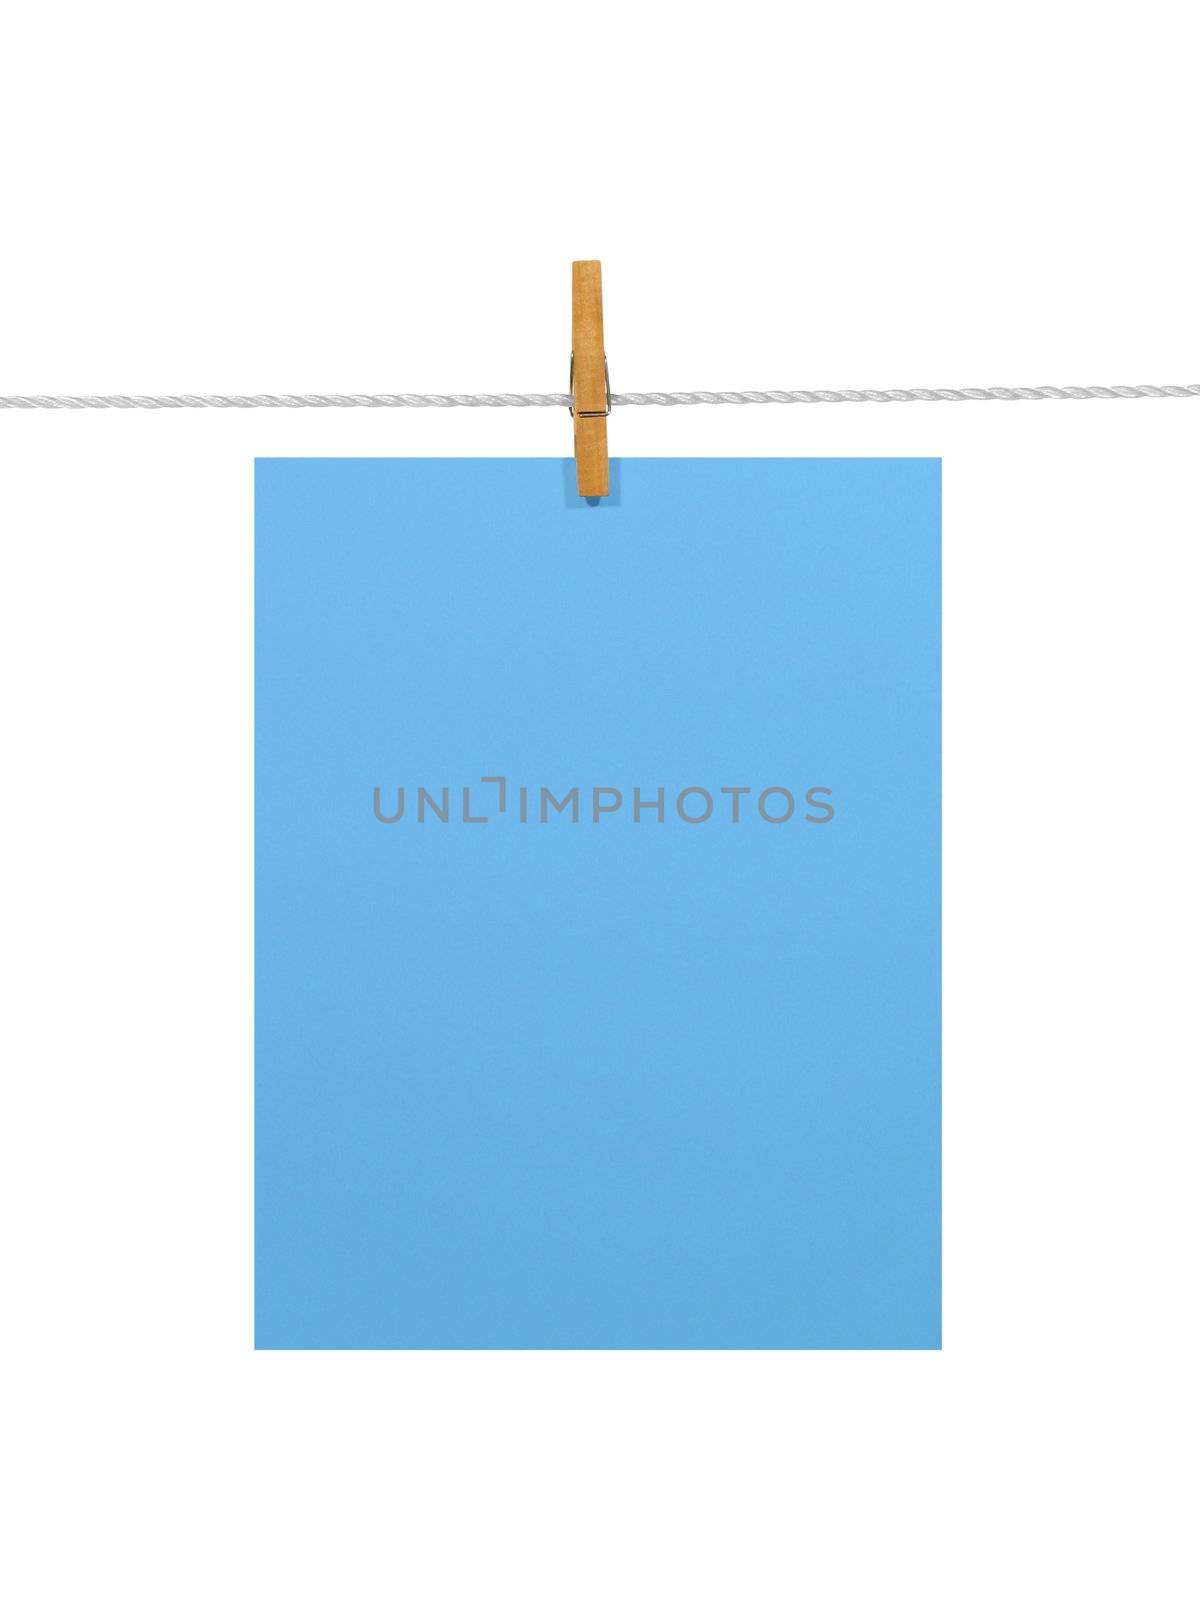 Sky-blue paper sheet on a clothes line (+2 clipping paths) by anikasalsera